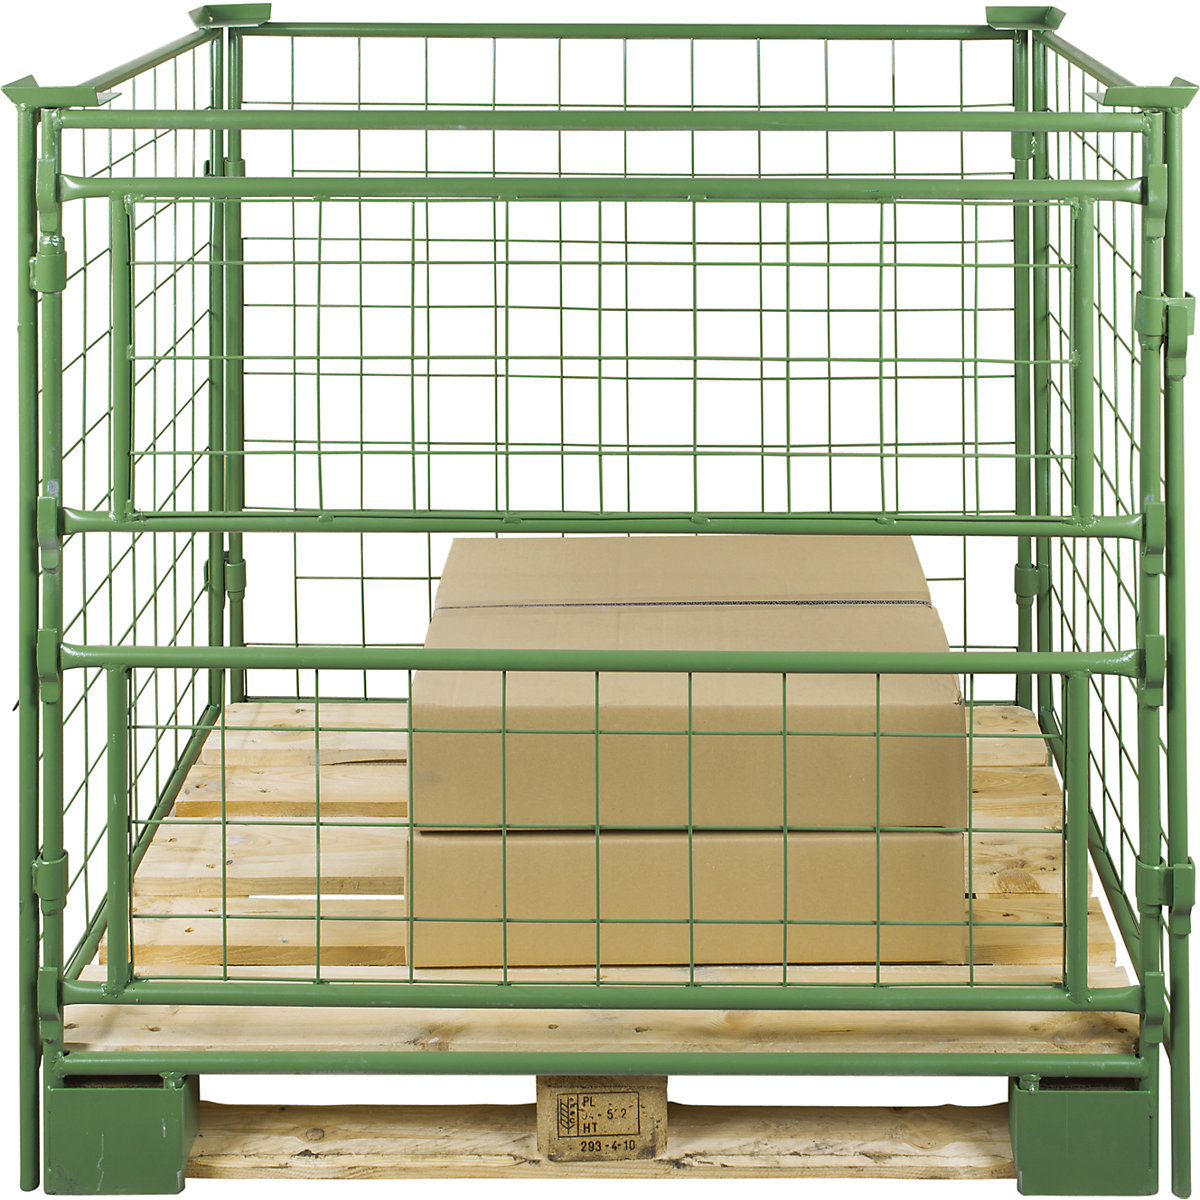 Pallet frame, effective height 1200 mm, for attaching, WxL 800 x 1200 mm, 1 long side with 2 parts, removable-2